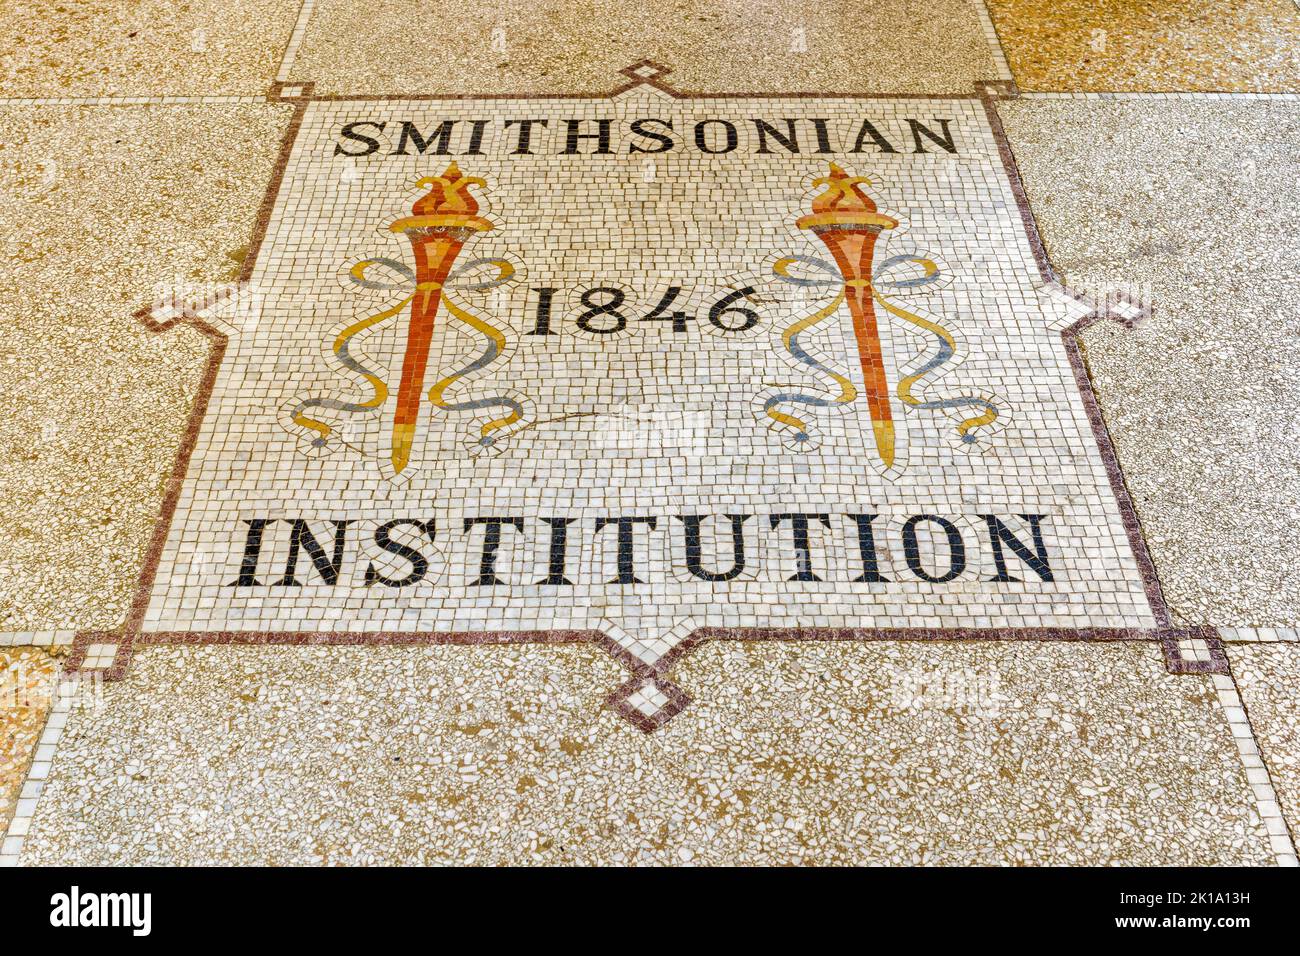 Washington, DC - Sept. 7, 2022: Original mosaic tile floor from 1846 was uncovered during restoration of the original Smithsonian Institution Building Stock Photo